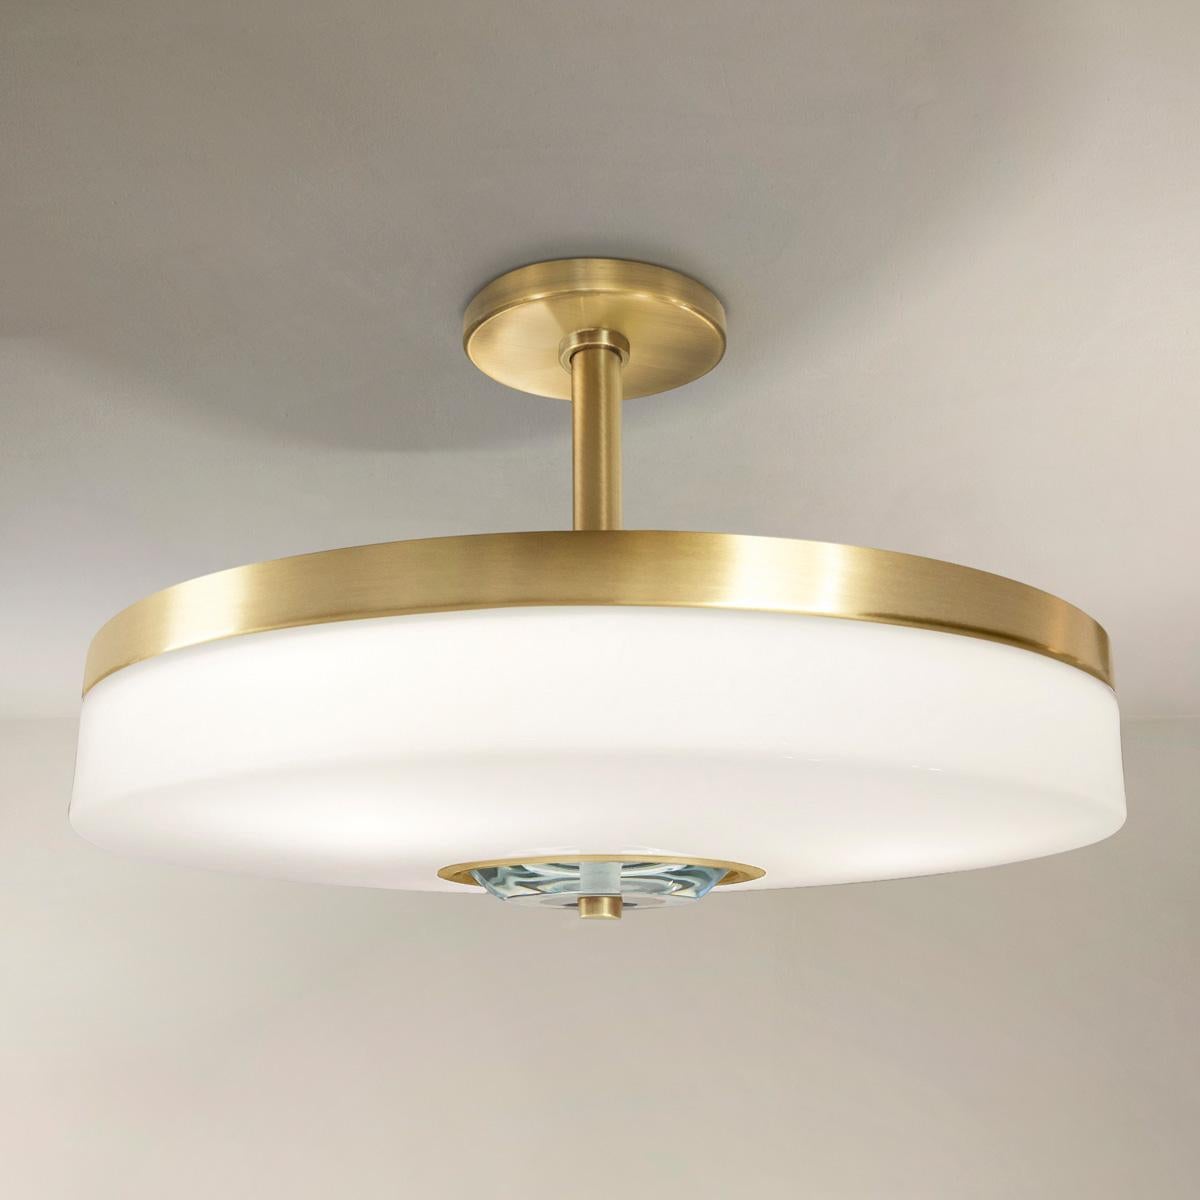 Modern Iris Piccolo Ceiling Light by Gaspare Asaro- Satin Brass Finish For Sale